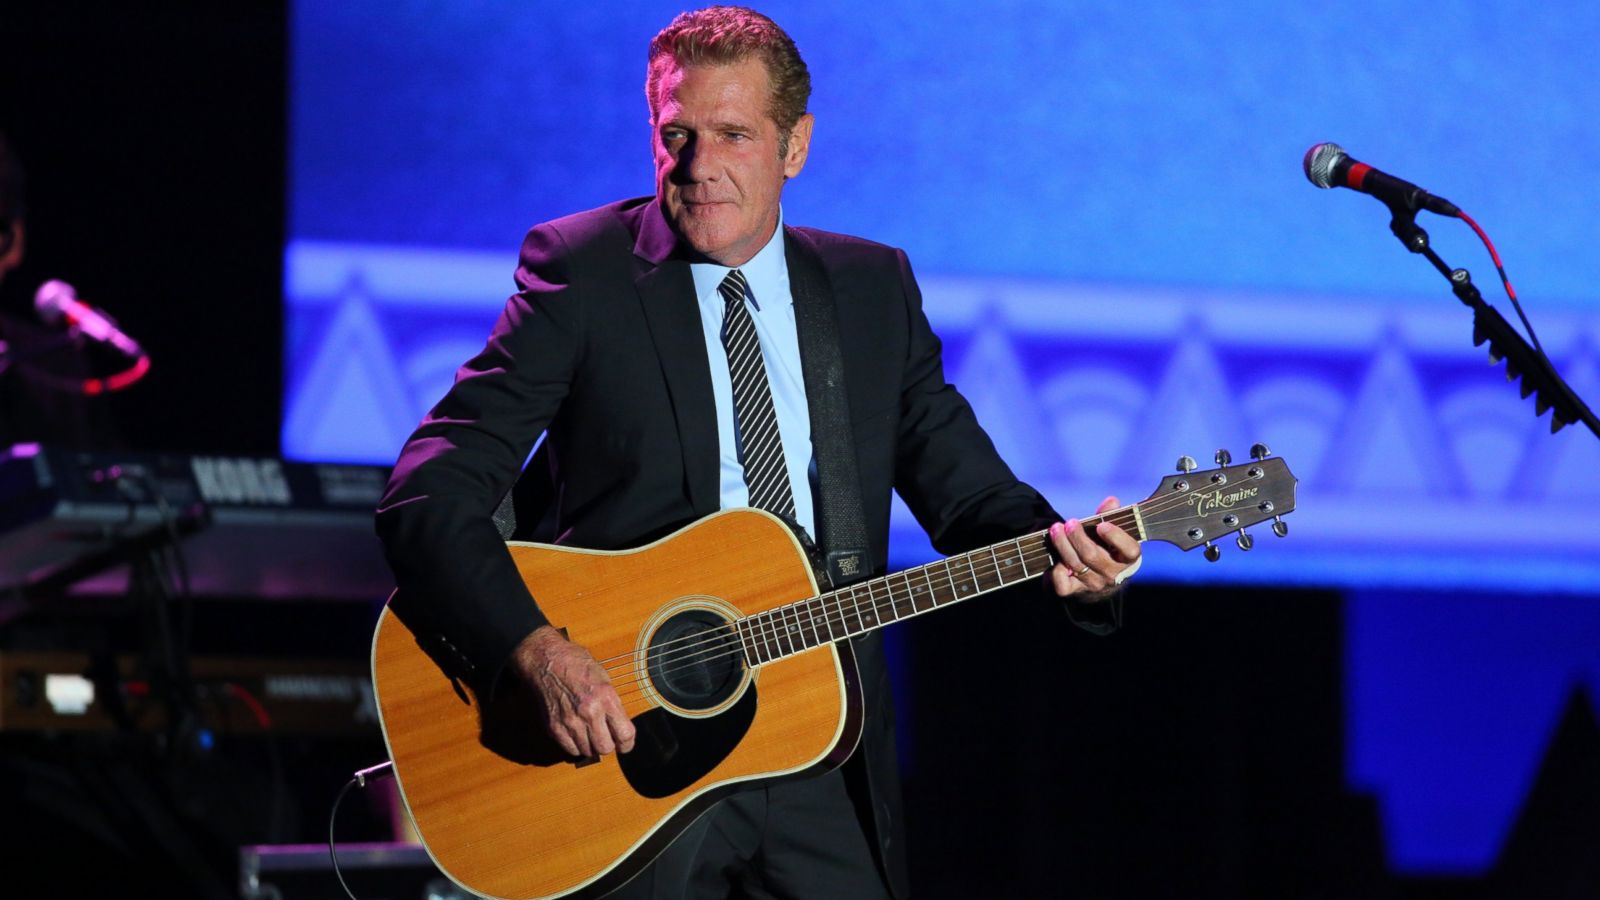 5 Years Ago Today: Eagles co-founder Glenn Frey dies at 67